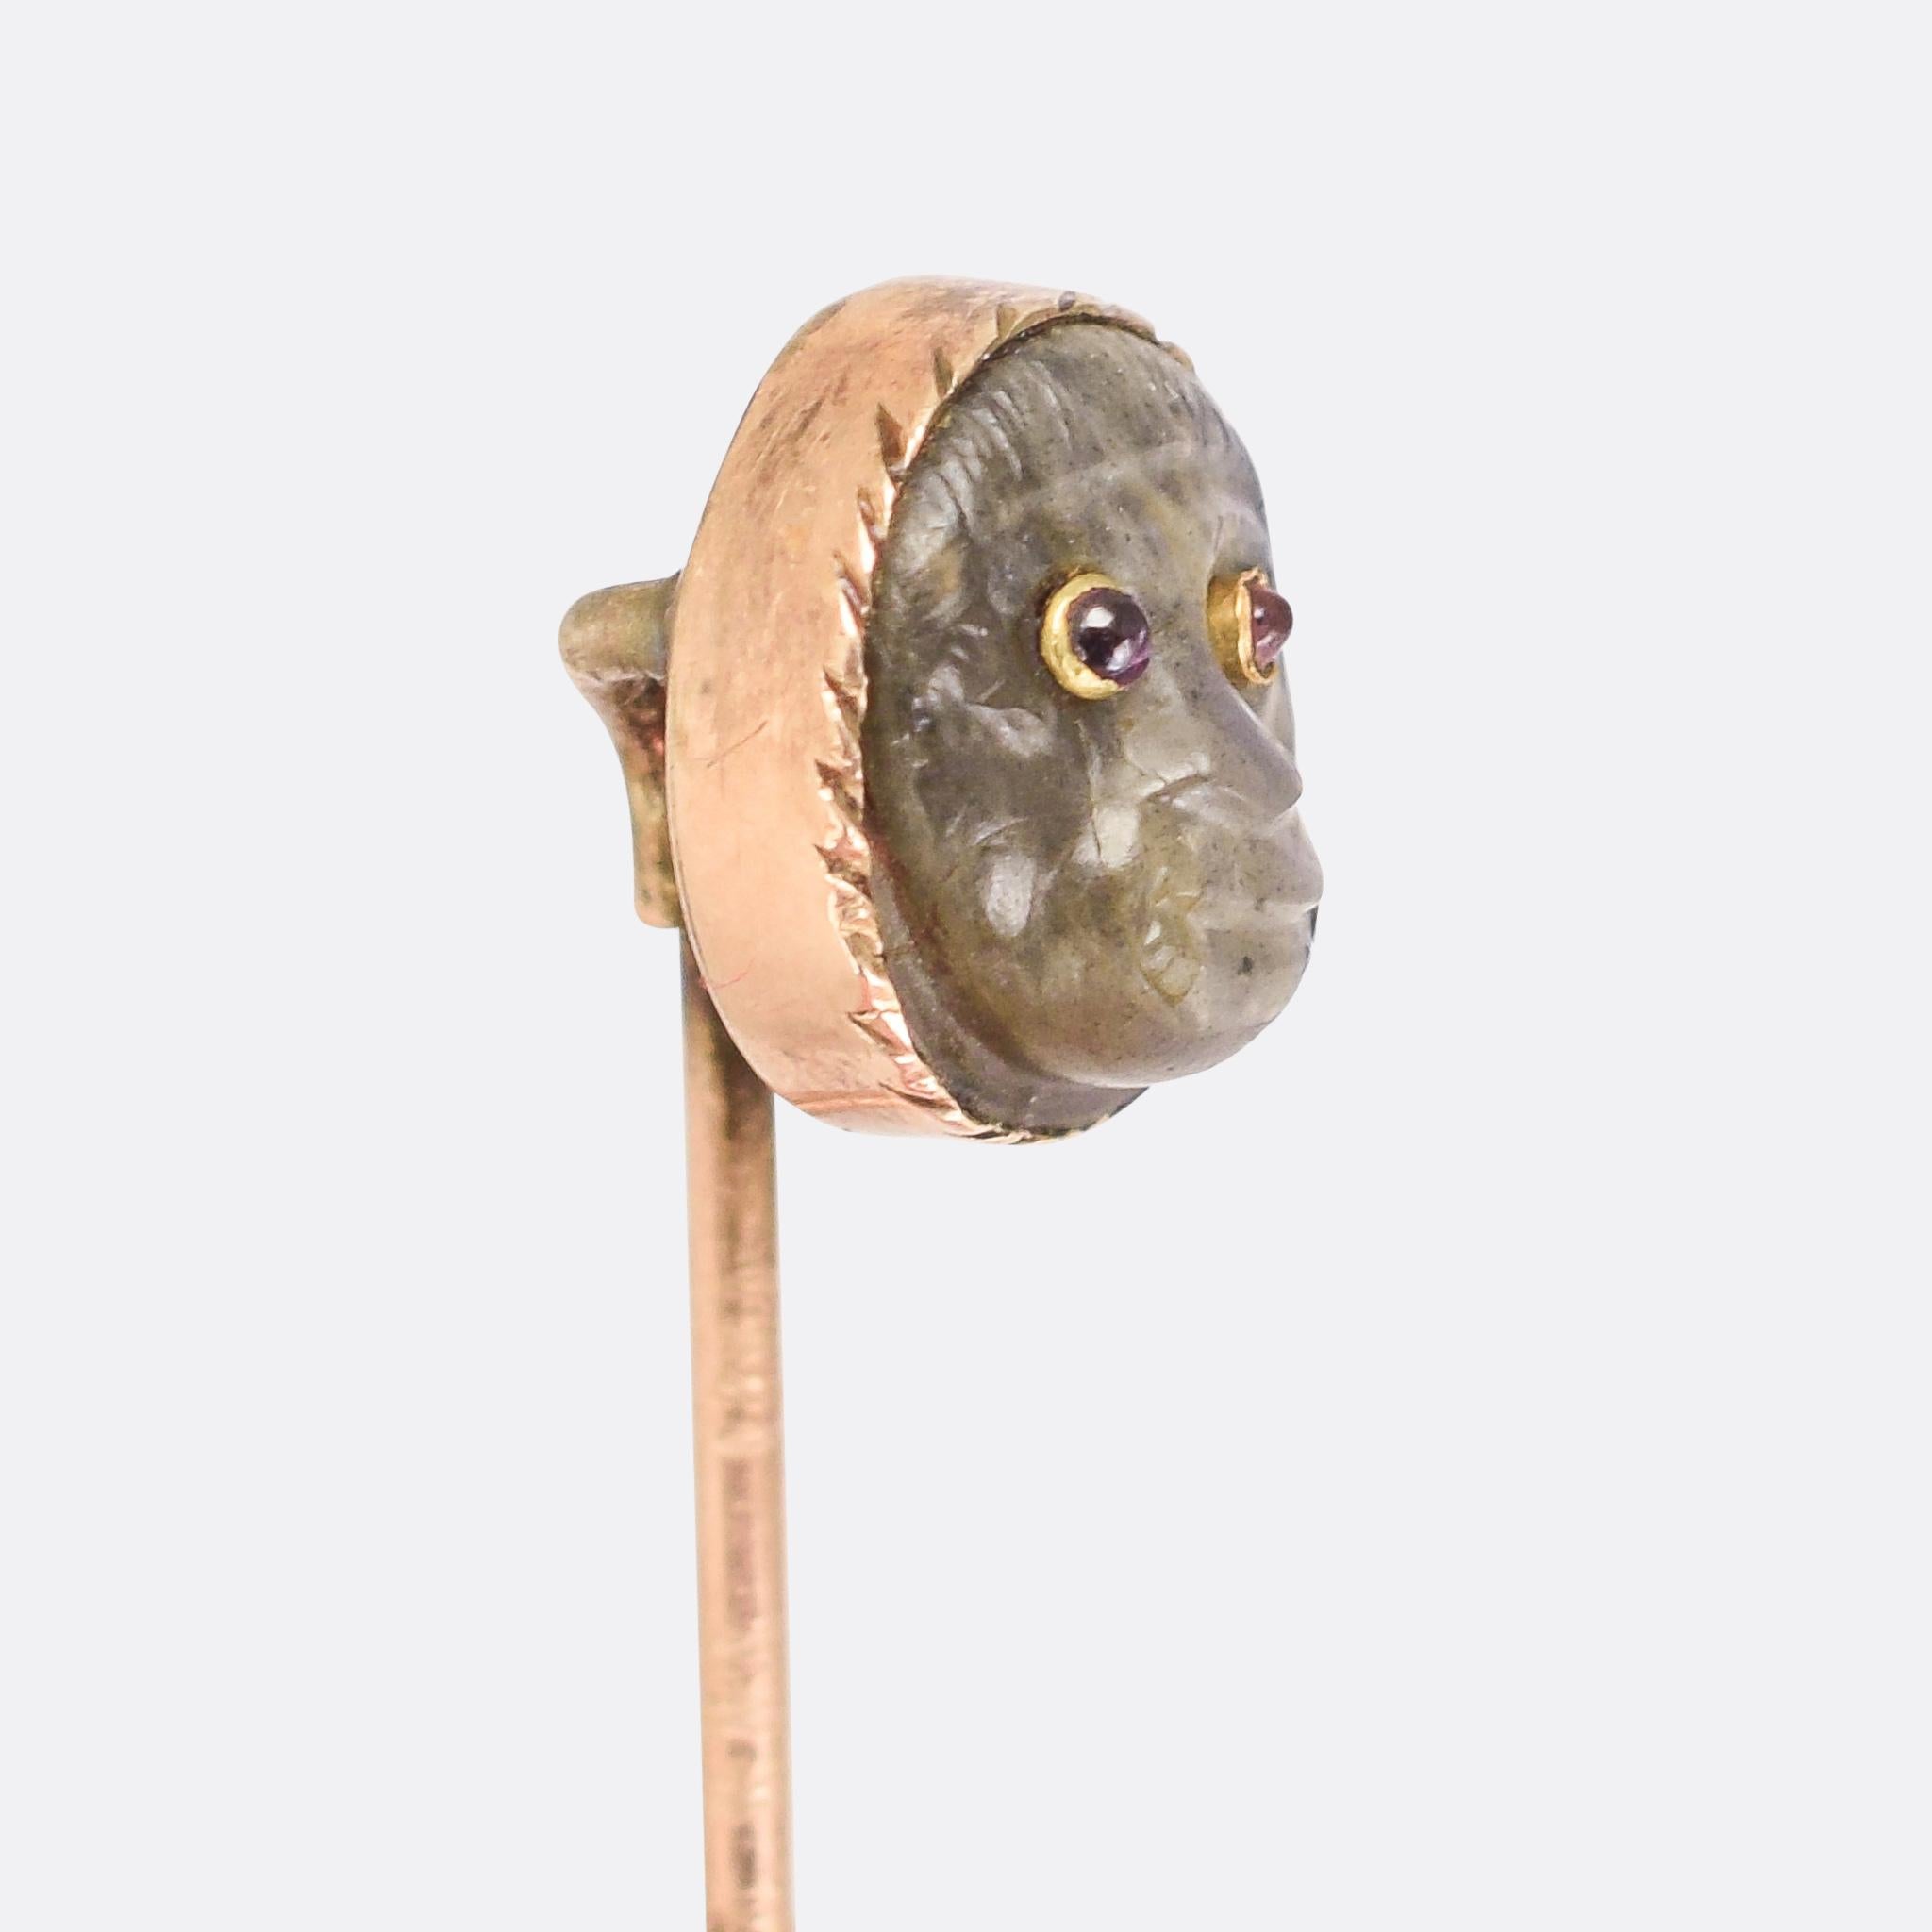 An unusual Georgian stick pin set with a carved labradorite monkey head, set with ruby cabochon eyes. The stone shimmers beautifully, with various shades of blue that form a striking contrast with the red eyes. It dates from the late 18th Century,